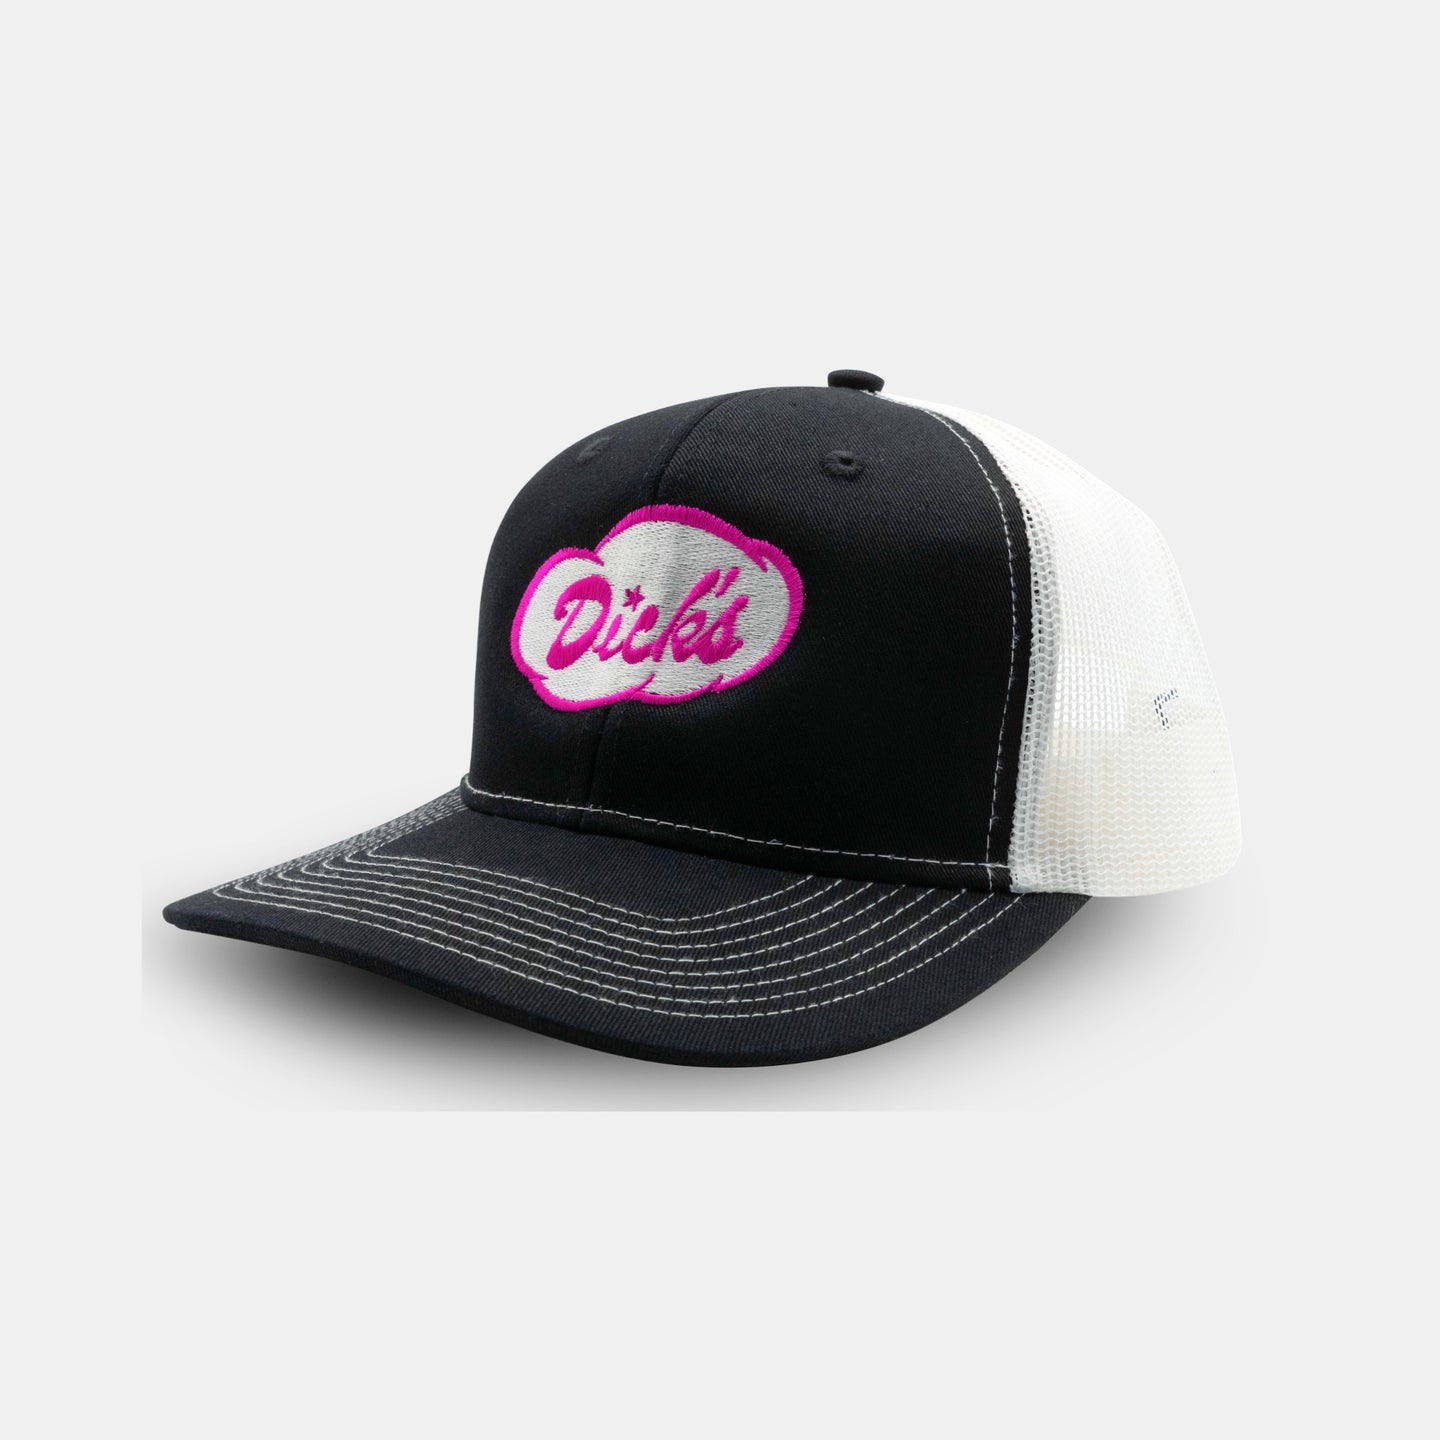 Side View white and black trucker hat with white stitching and magenta 